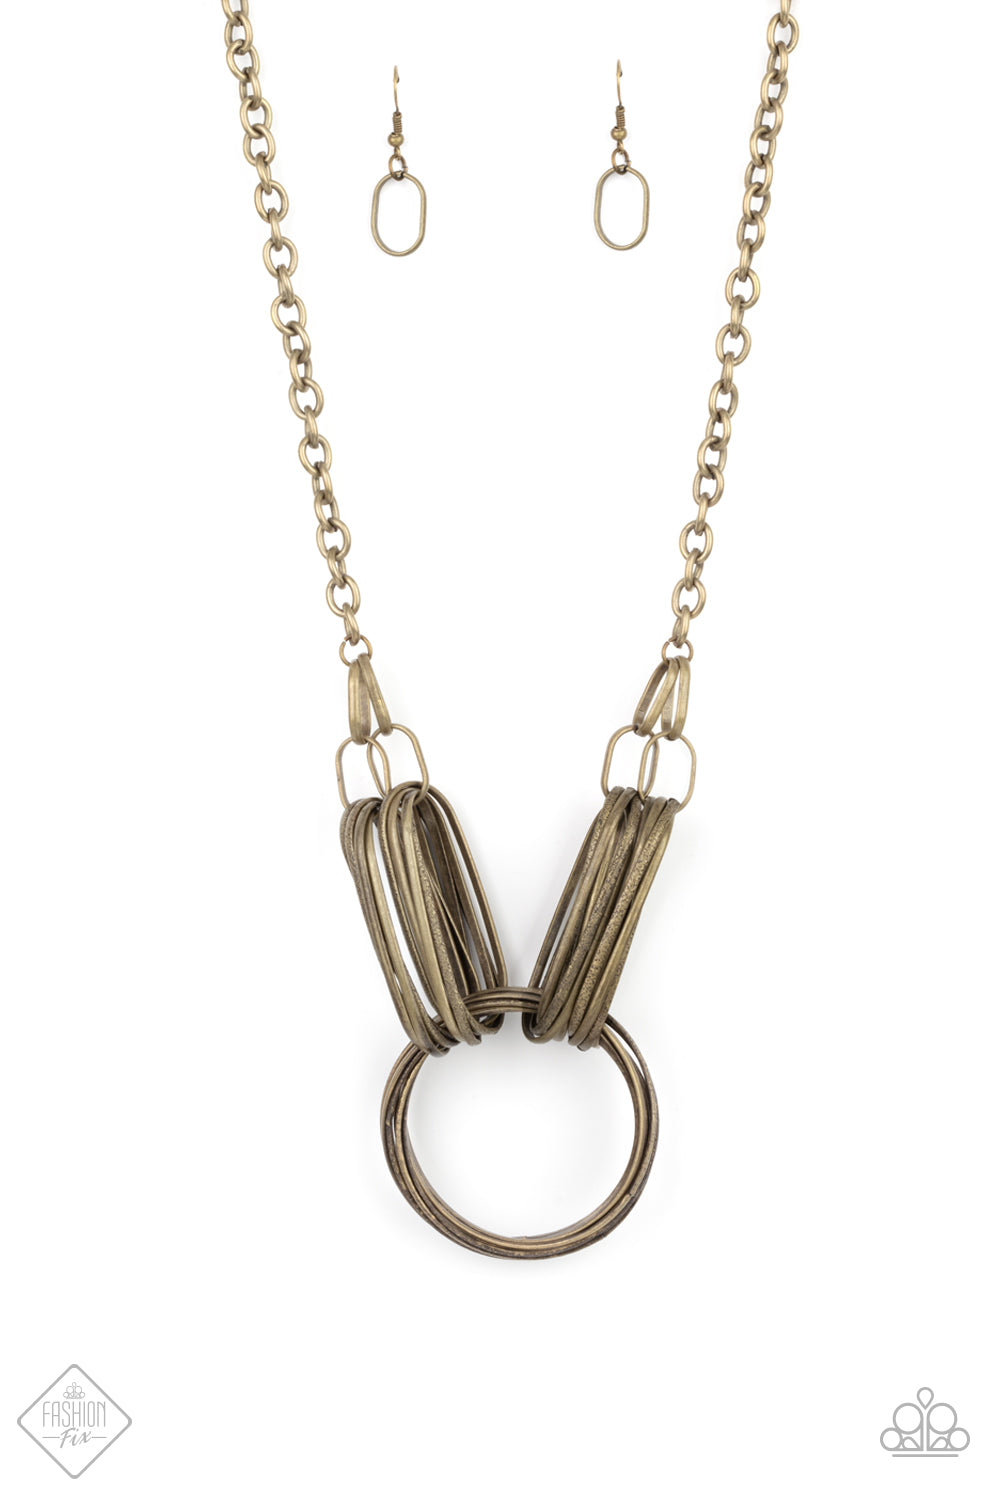 Paparazzi Accessories Lip Sync Links - Brass Necklaces and Bracelets Set layers of oblong brass links attach to a collection of oversized antiqued brass rings creating a dramatic industrial centerpiece. Attached to a brass chain, the rustic links create an unconventionally edgy statement below the collar. Features an adjustable clasp closure.  Sold as one individual necklace and Bracelets. Includes one pair of matching earrings.